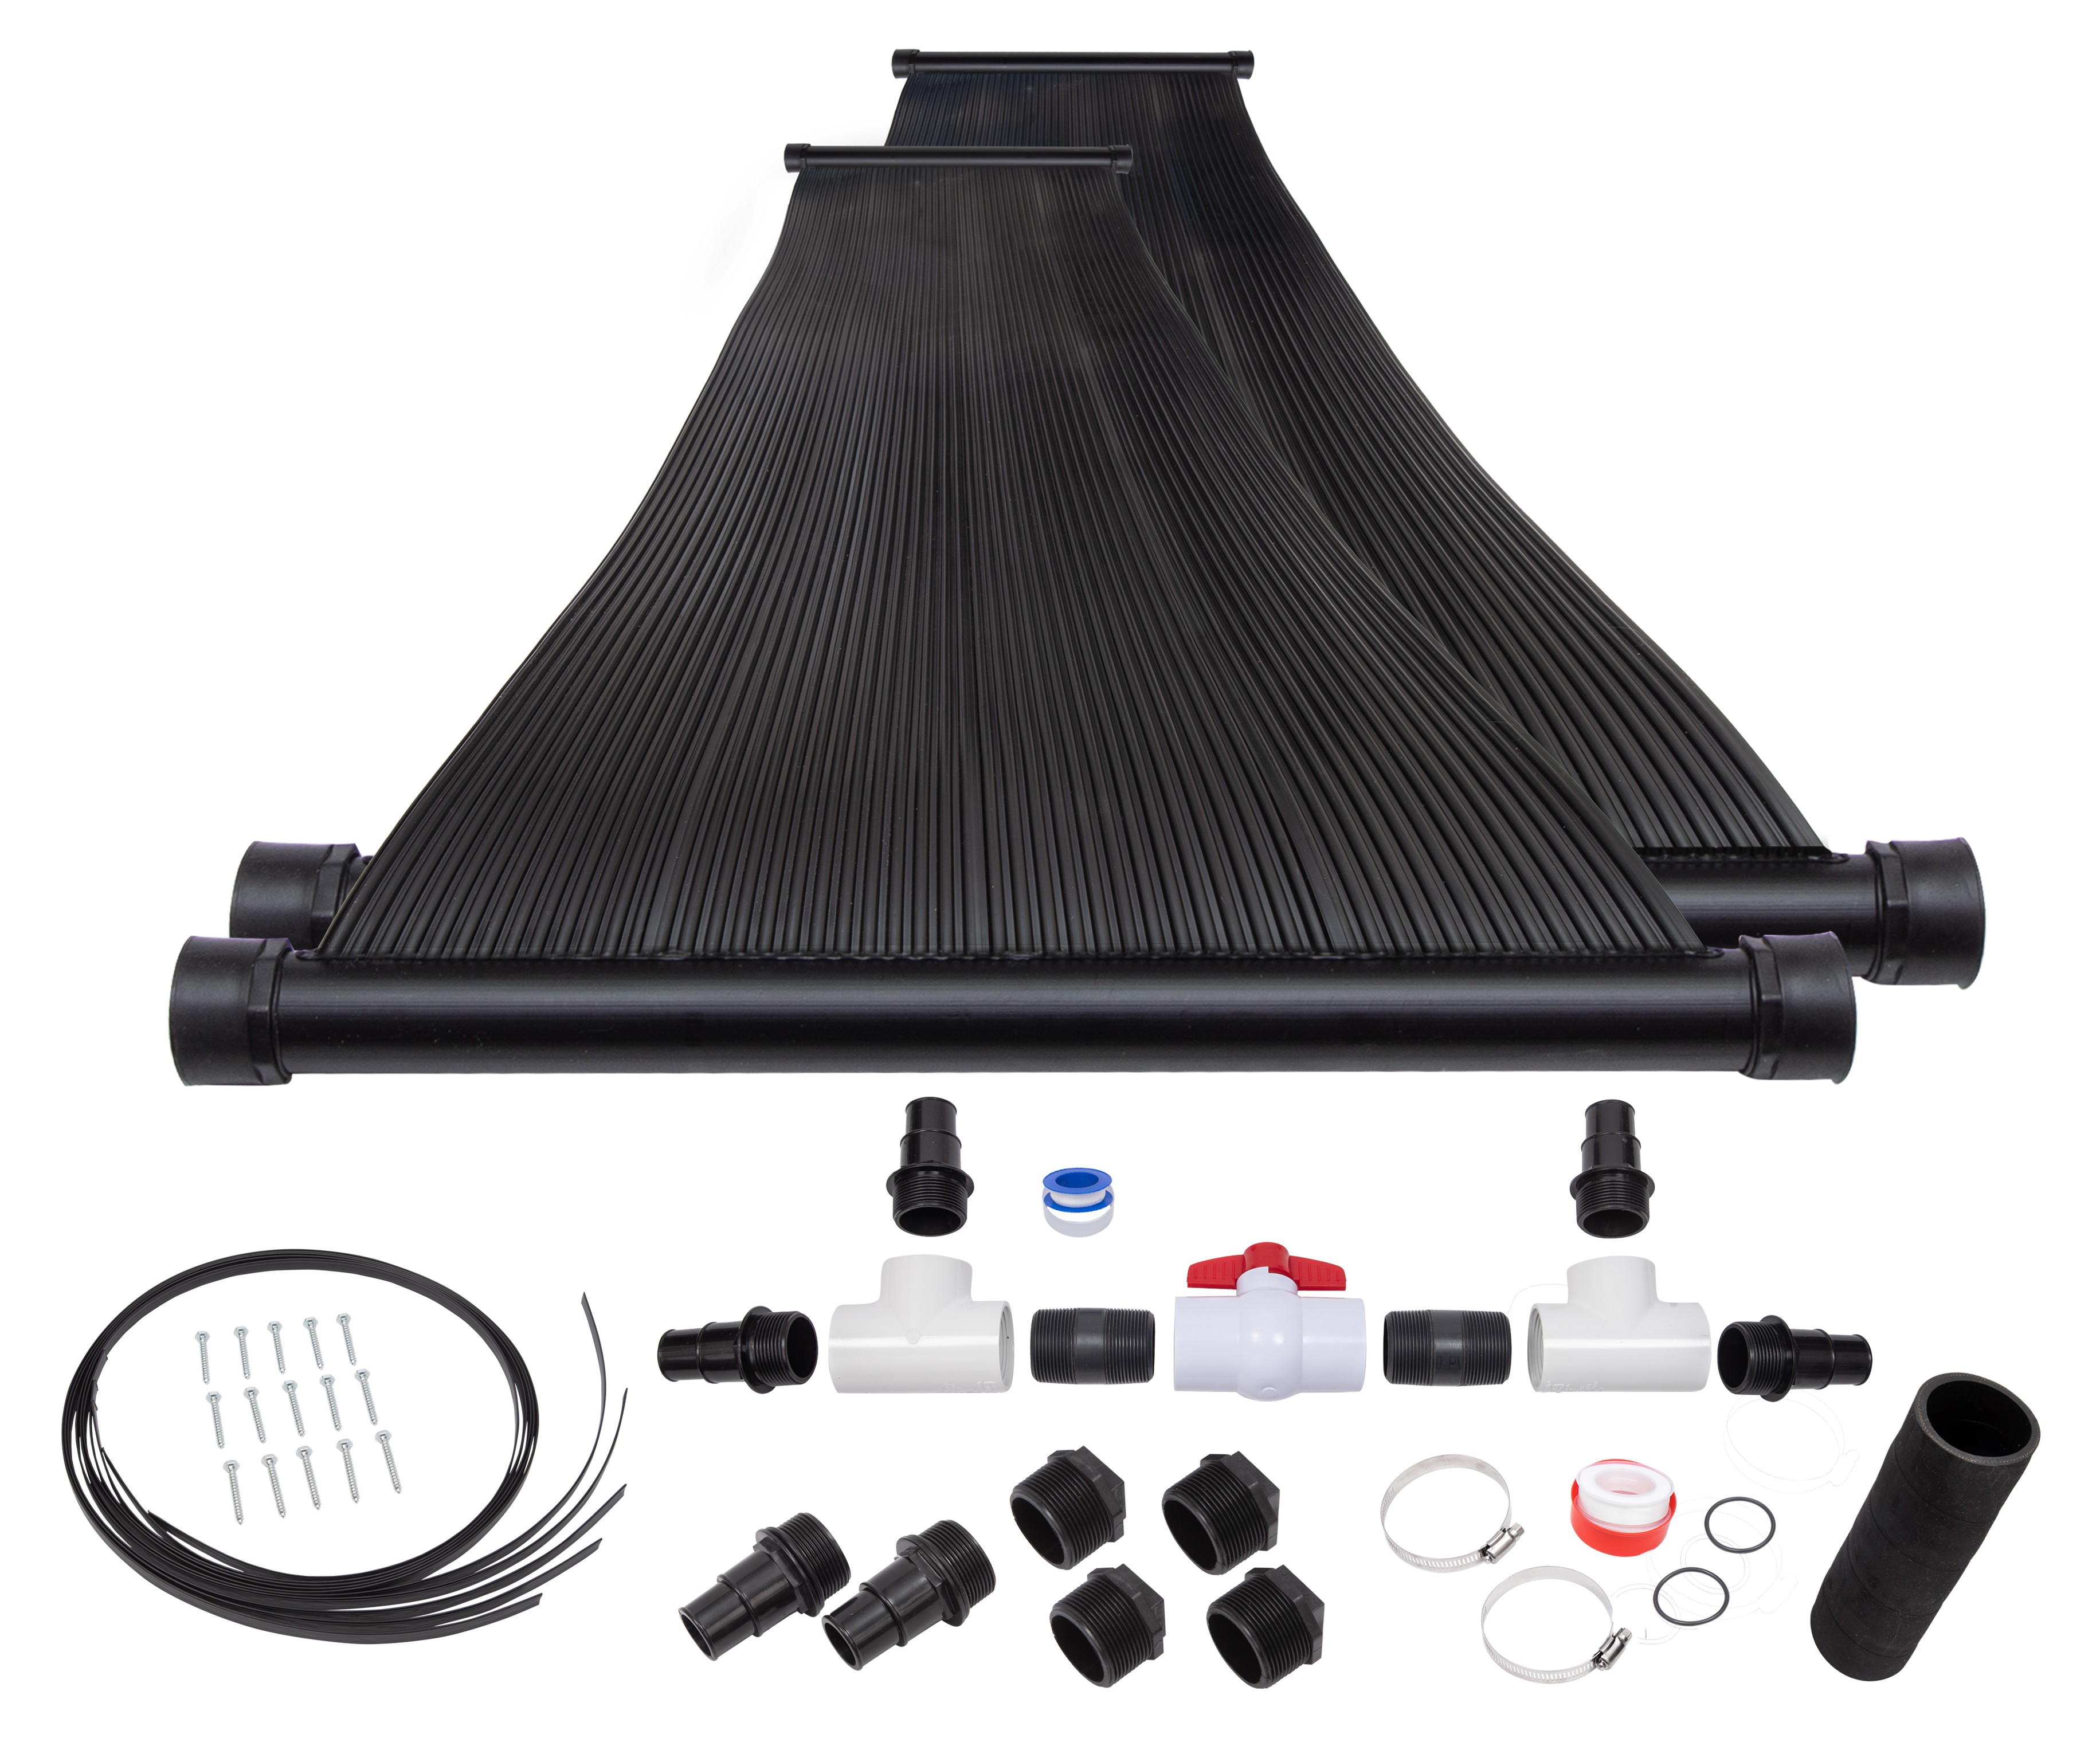 2-2'X10' SunQuest Solar Pool Heater with Diverter and Roof/Rack Mounting Kit